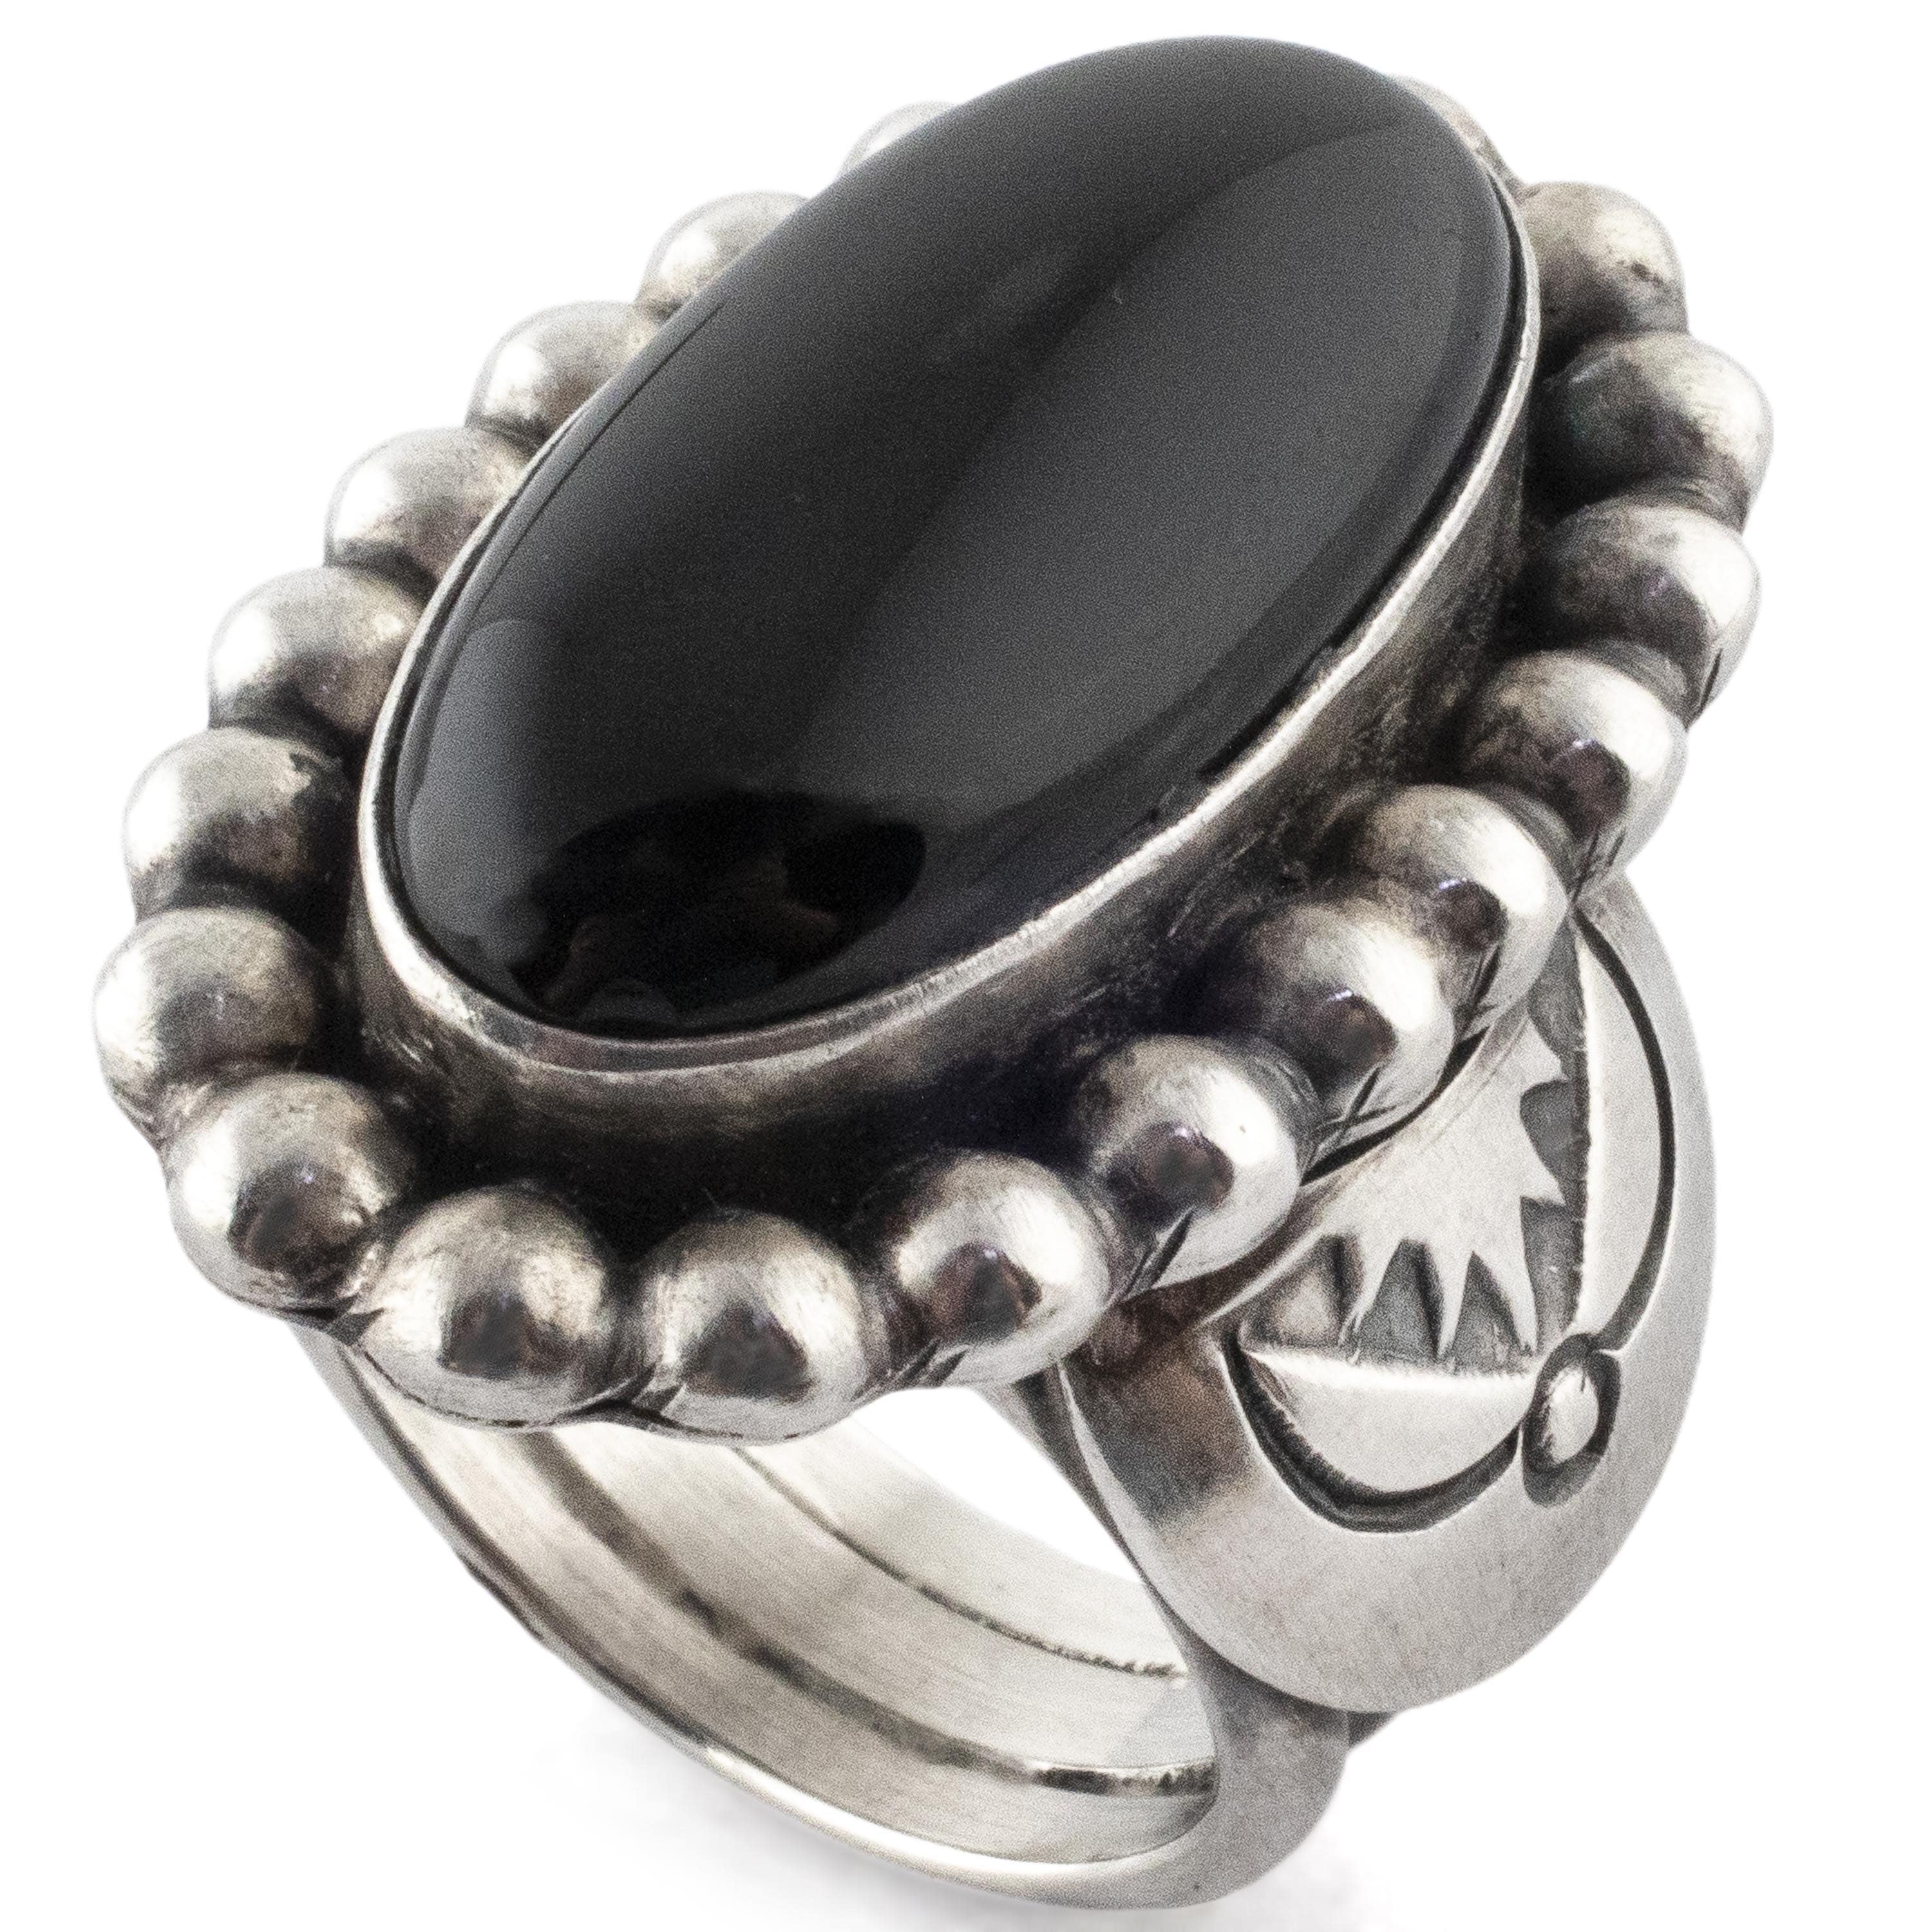 Kalifano Native American Jewelry 10 Paul Livingston Black Onyx USA Native American Made 925 Sterling Silver Ring NAR1000.012.10